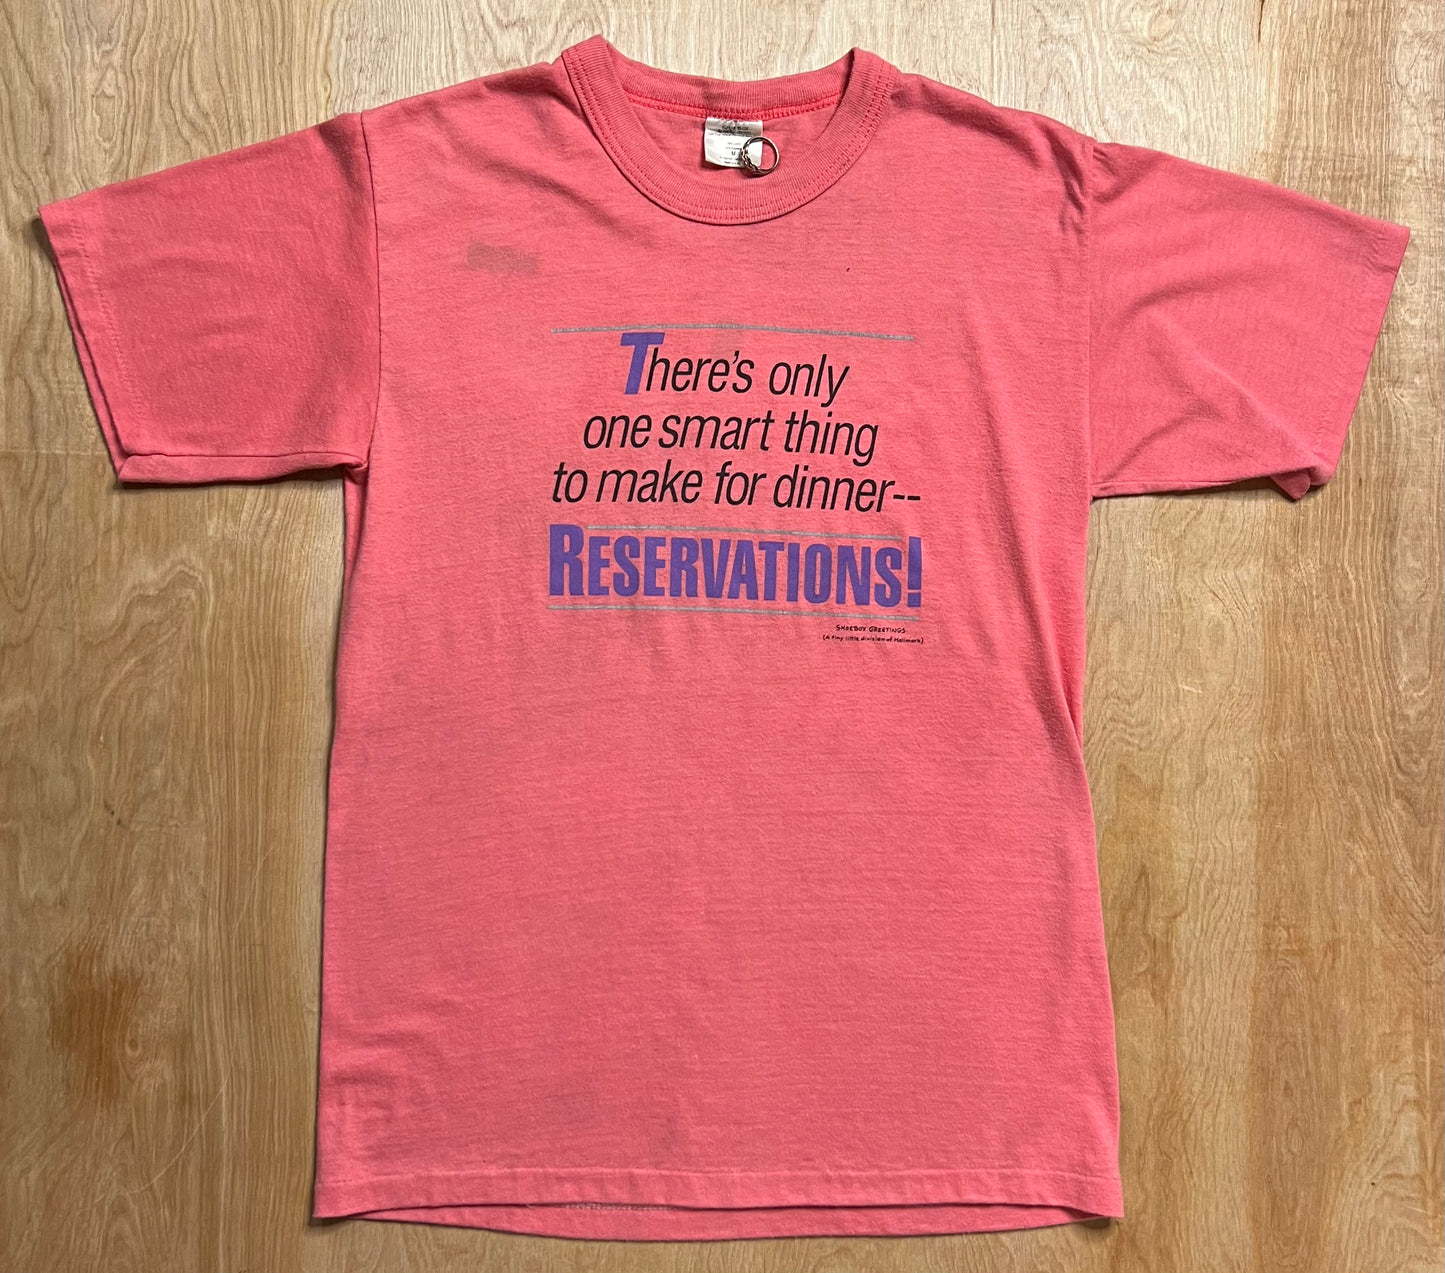 1990's "There's Only One Smart Thing to Make for Dinner" Single Stitch T-Shirt